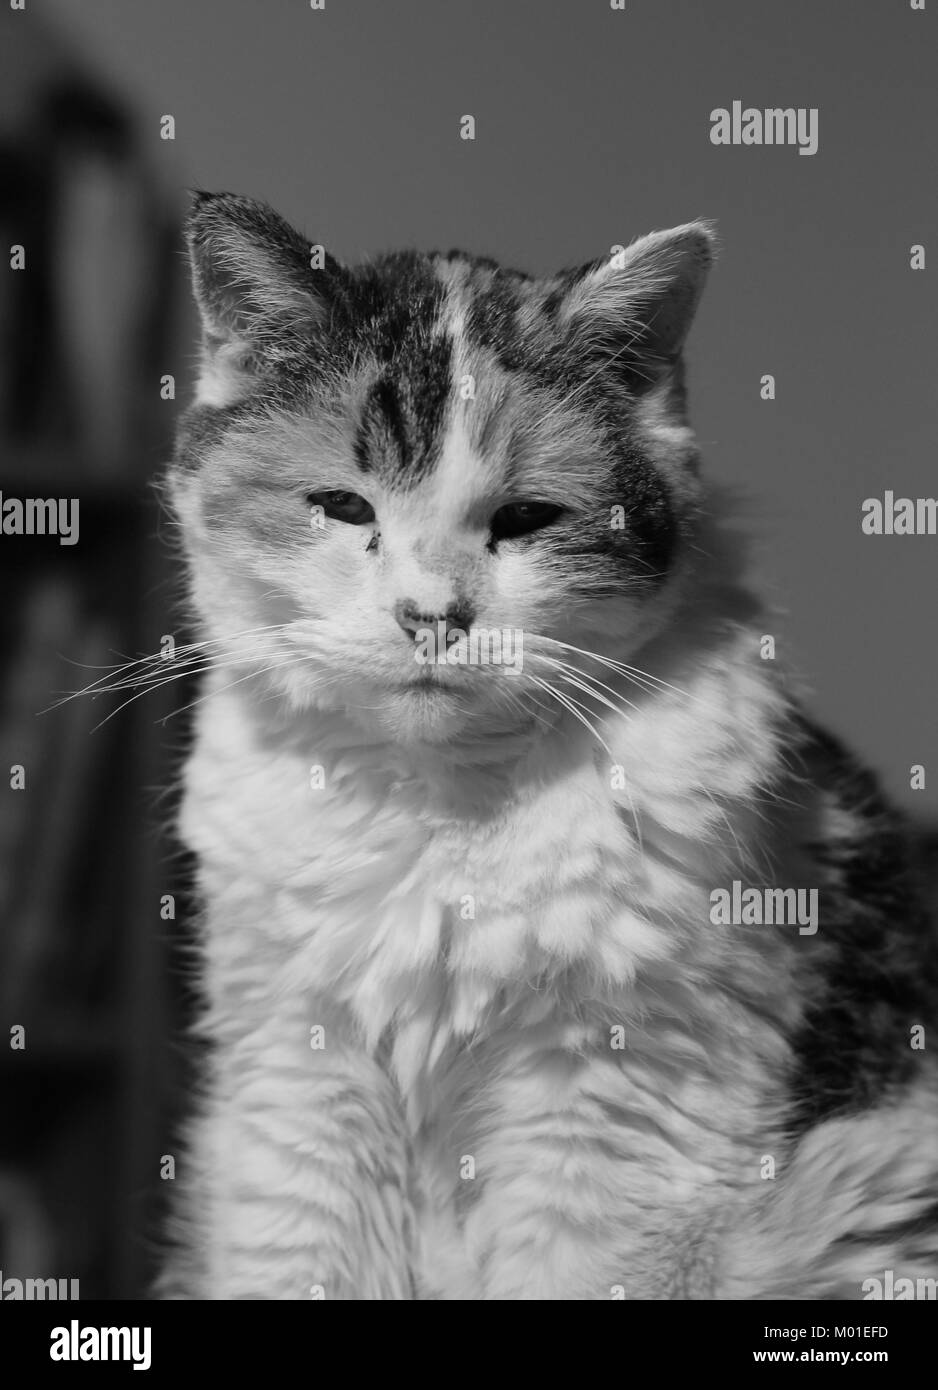 Black-and-white close-up image of a calico cat Stock Photo